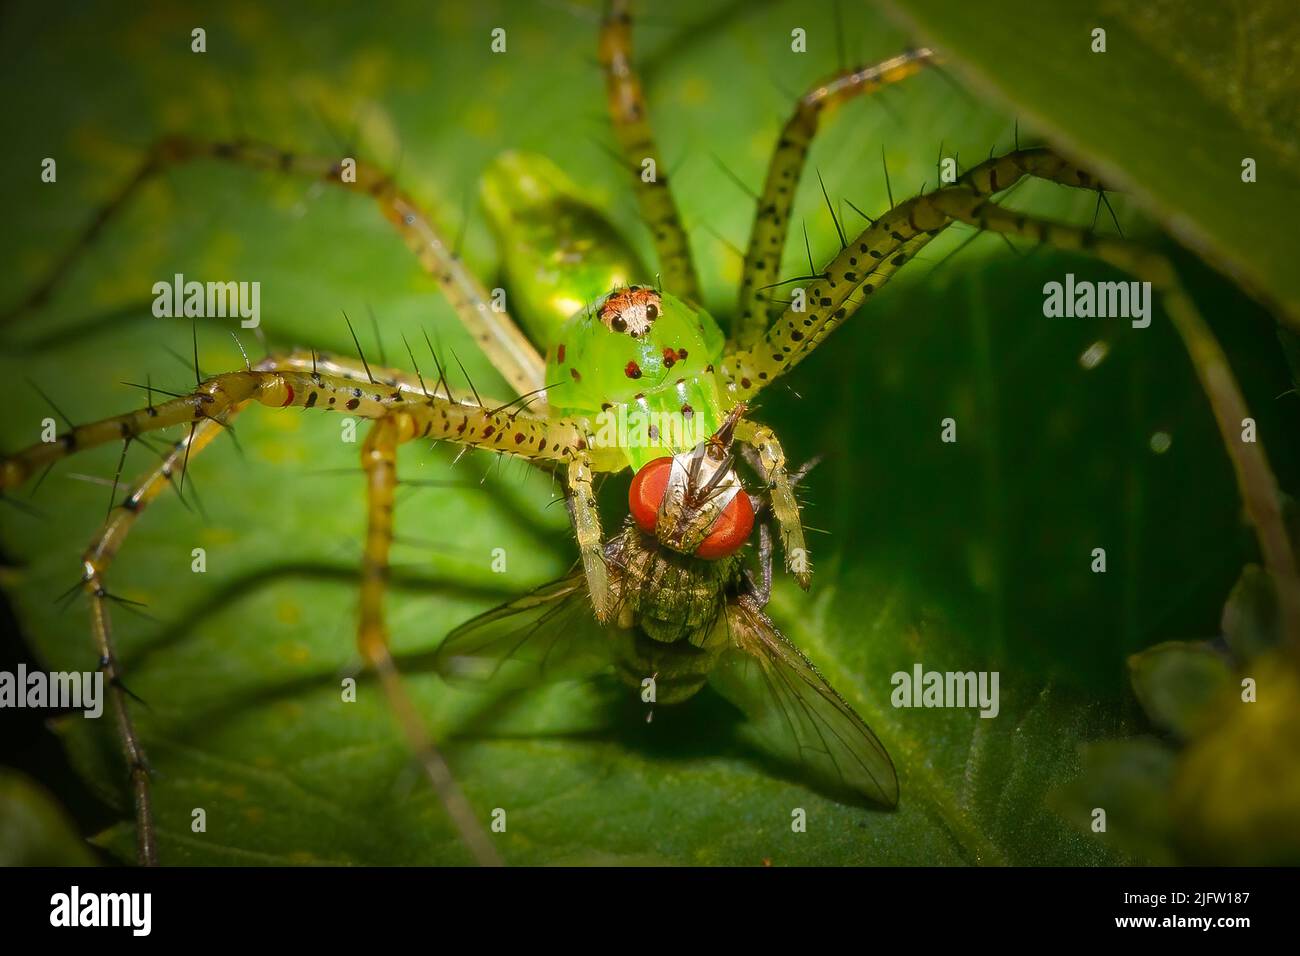 A Green Lynx spider enjoys her spider snack in this macro photograph. Stock Photo